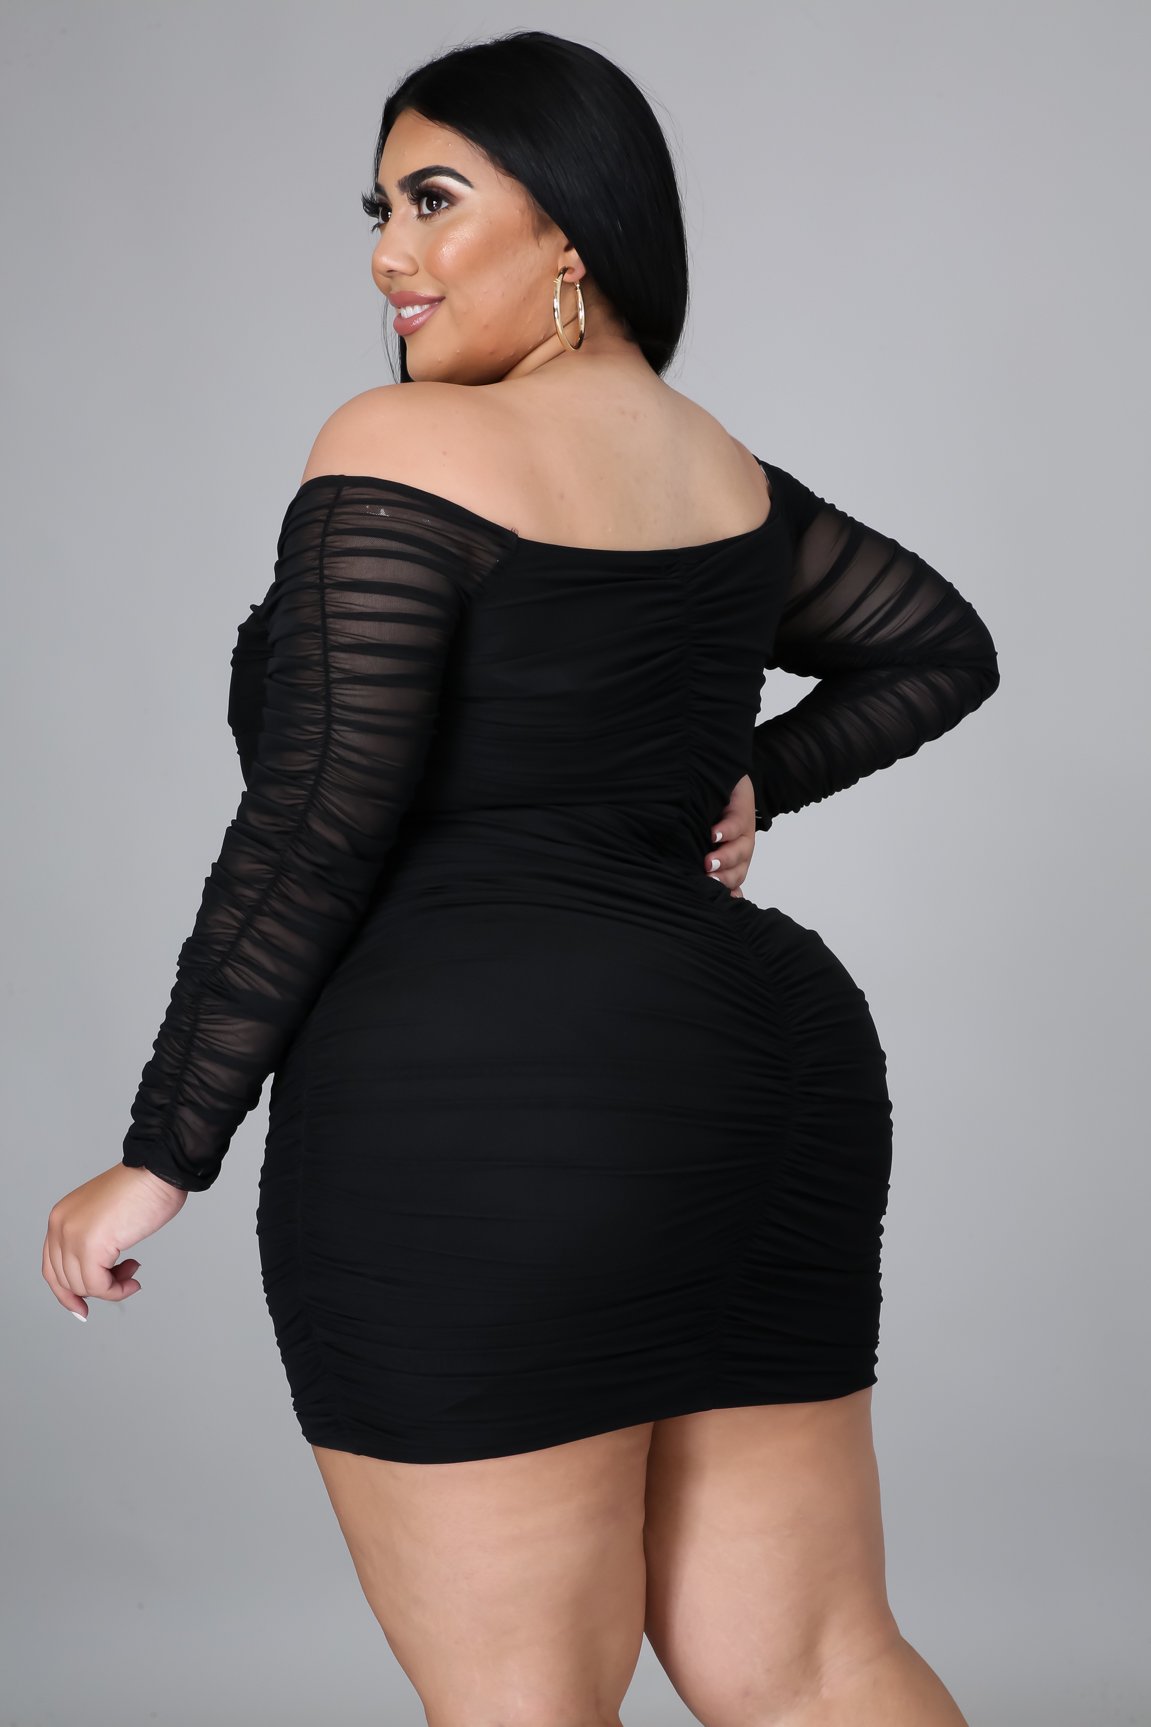 Tonight Im Yours Dress Plus is the perfect black dress, has amazing stretch with a corset style look, with hook closure. Ruched throughout, Long sheer sleeves with a off the shoulder look.